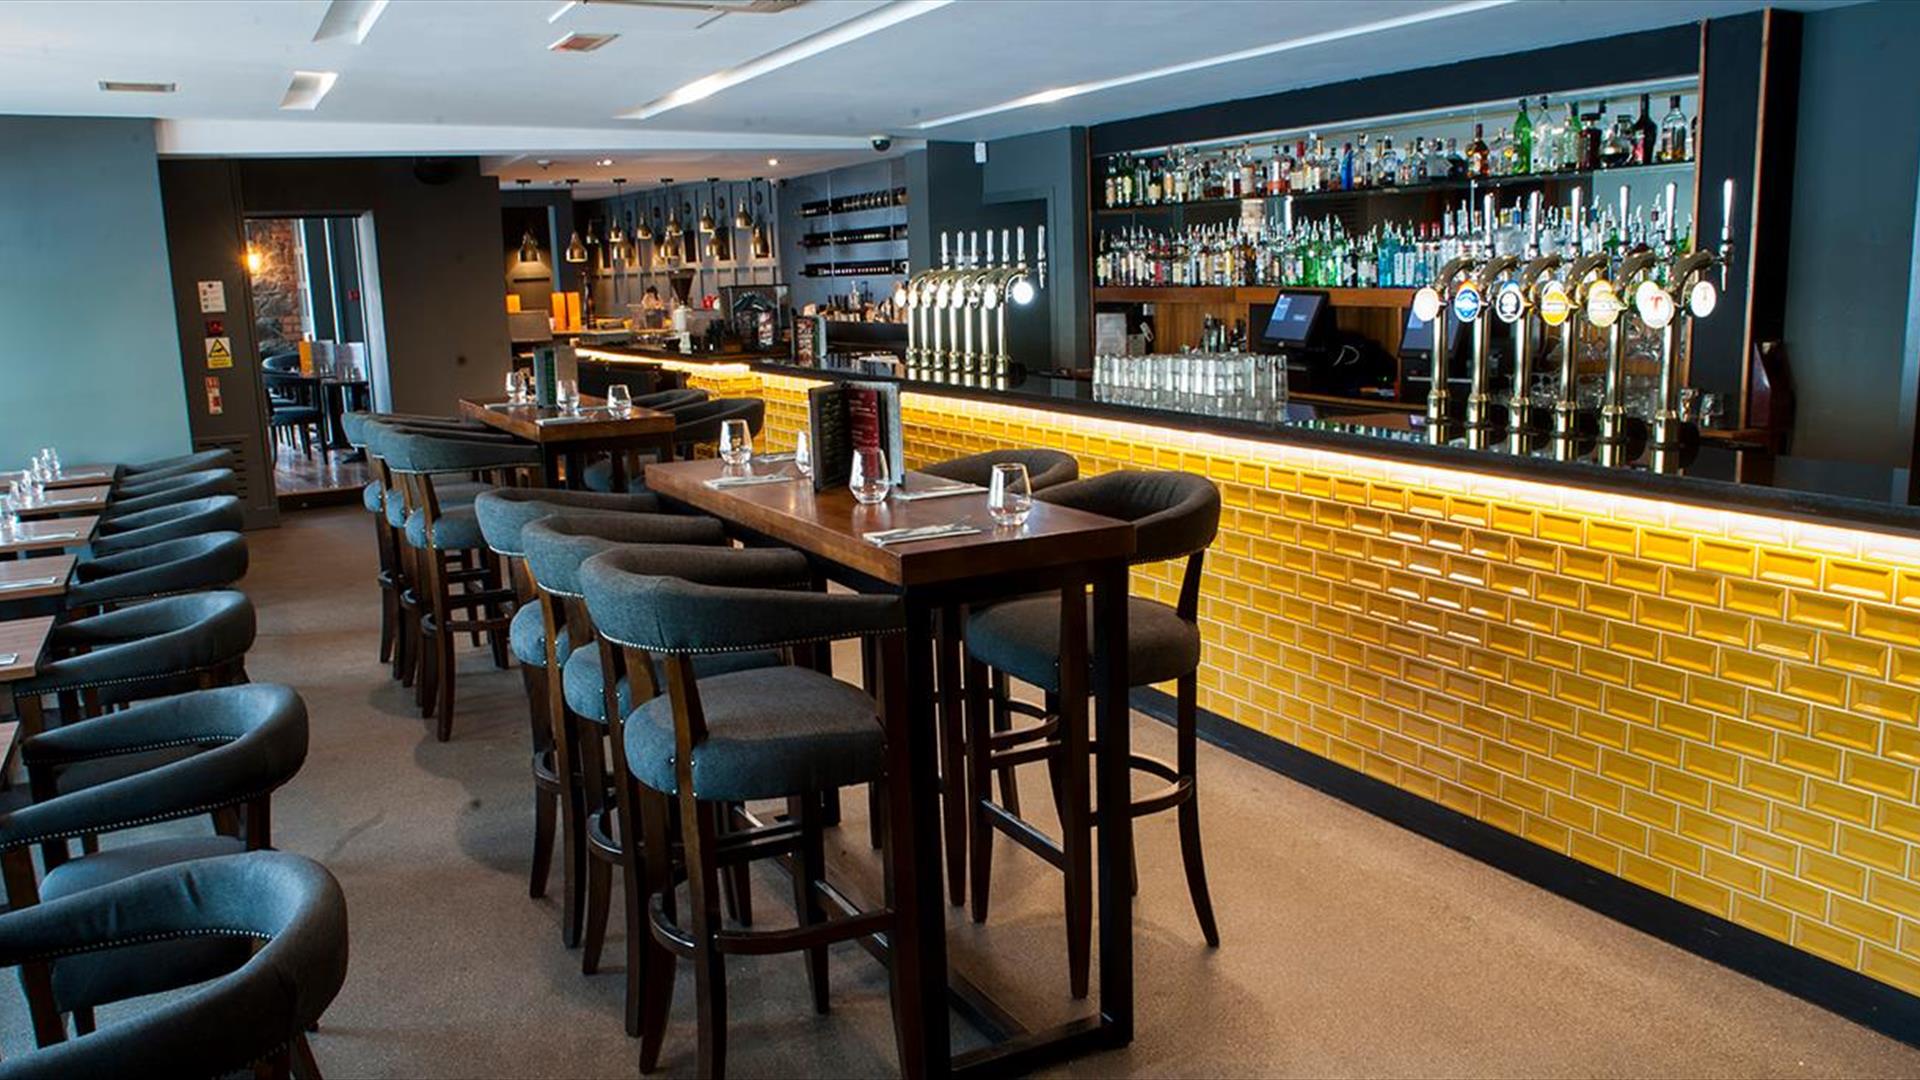 Image shows the Cardan bar with yellow brick front and an extensive seating area with low seating and tables and higher bar stool area